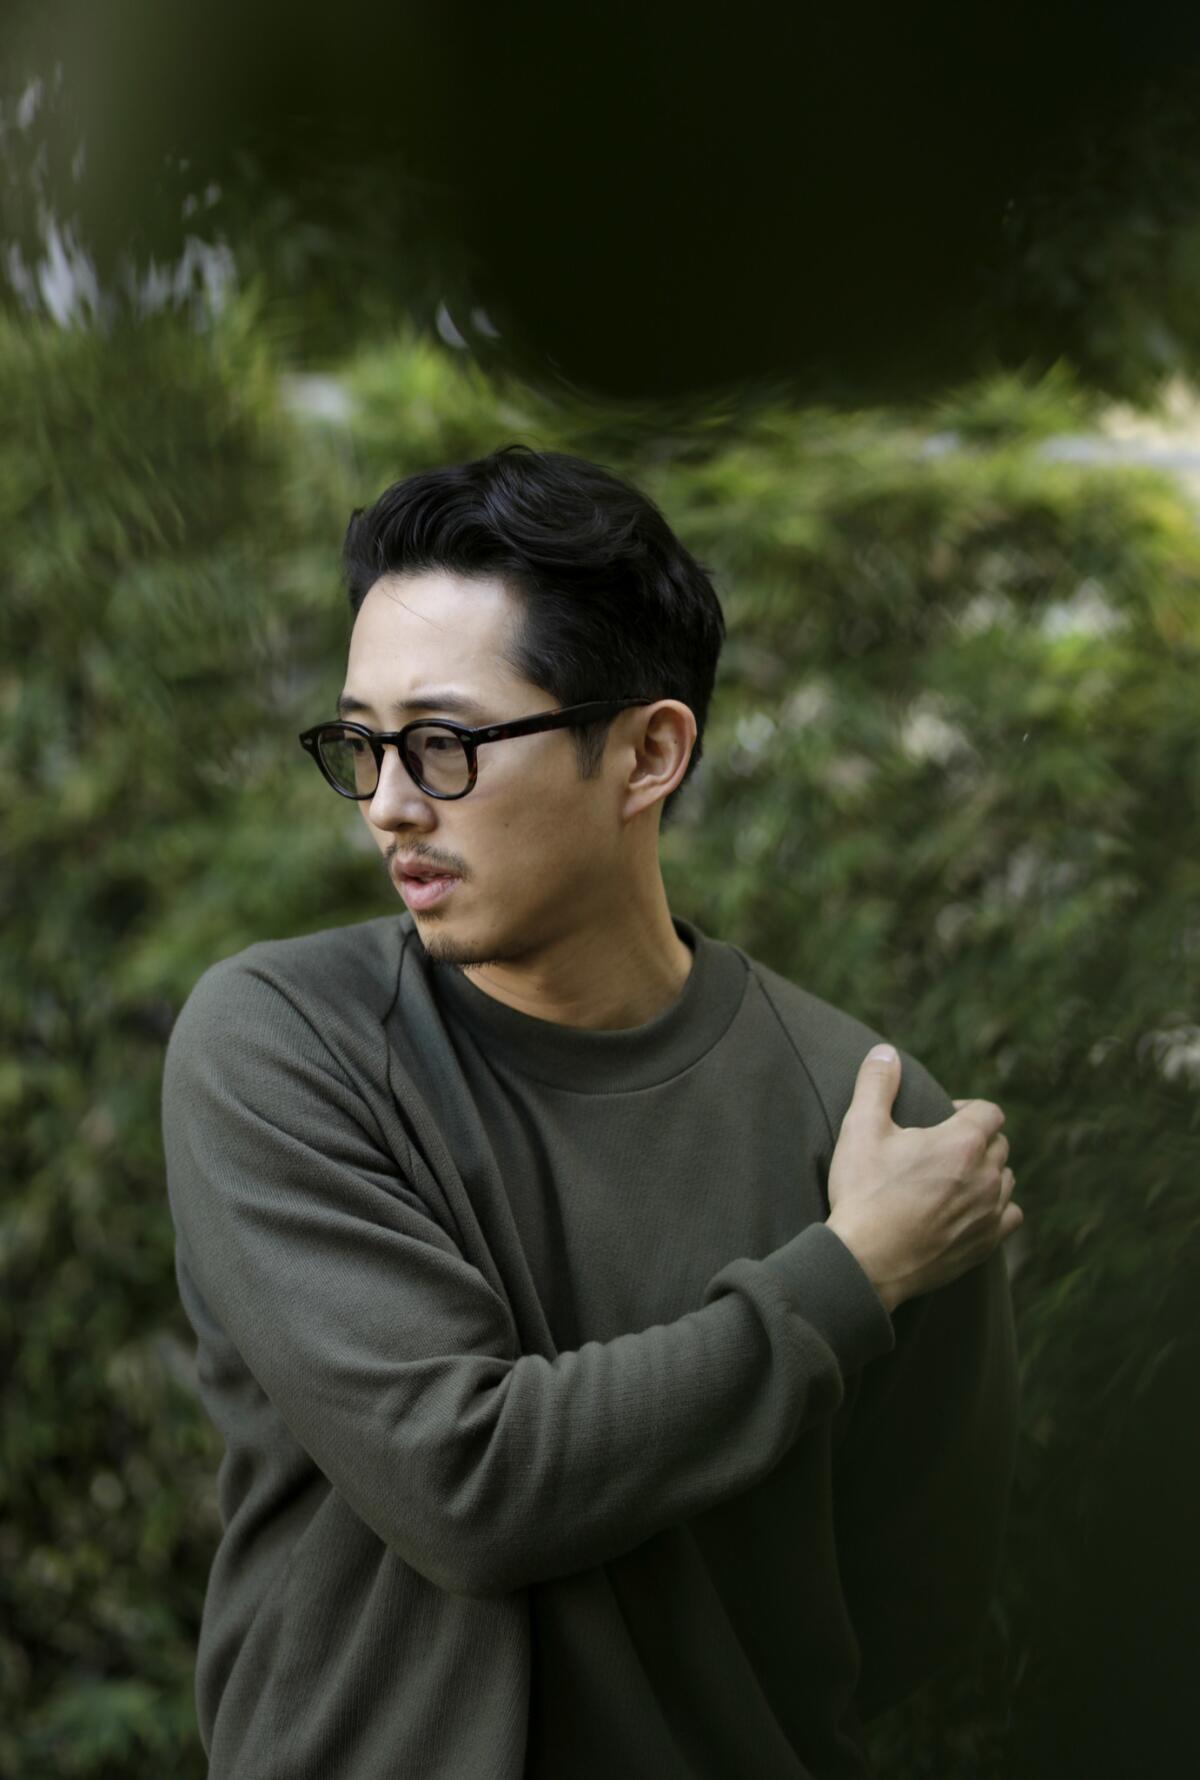 Steven Yeun, above, has a "mysterious duality," says "Burning" director Lee Chang-dong.